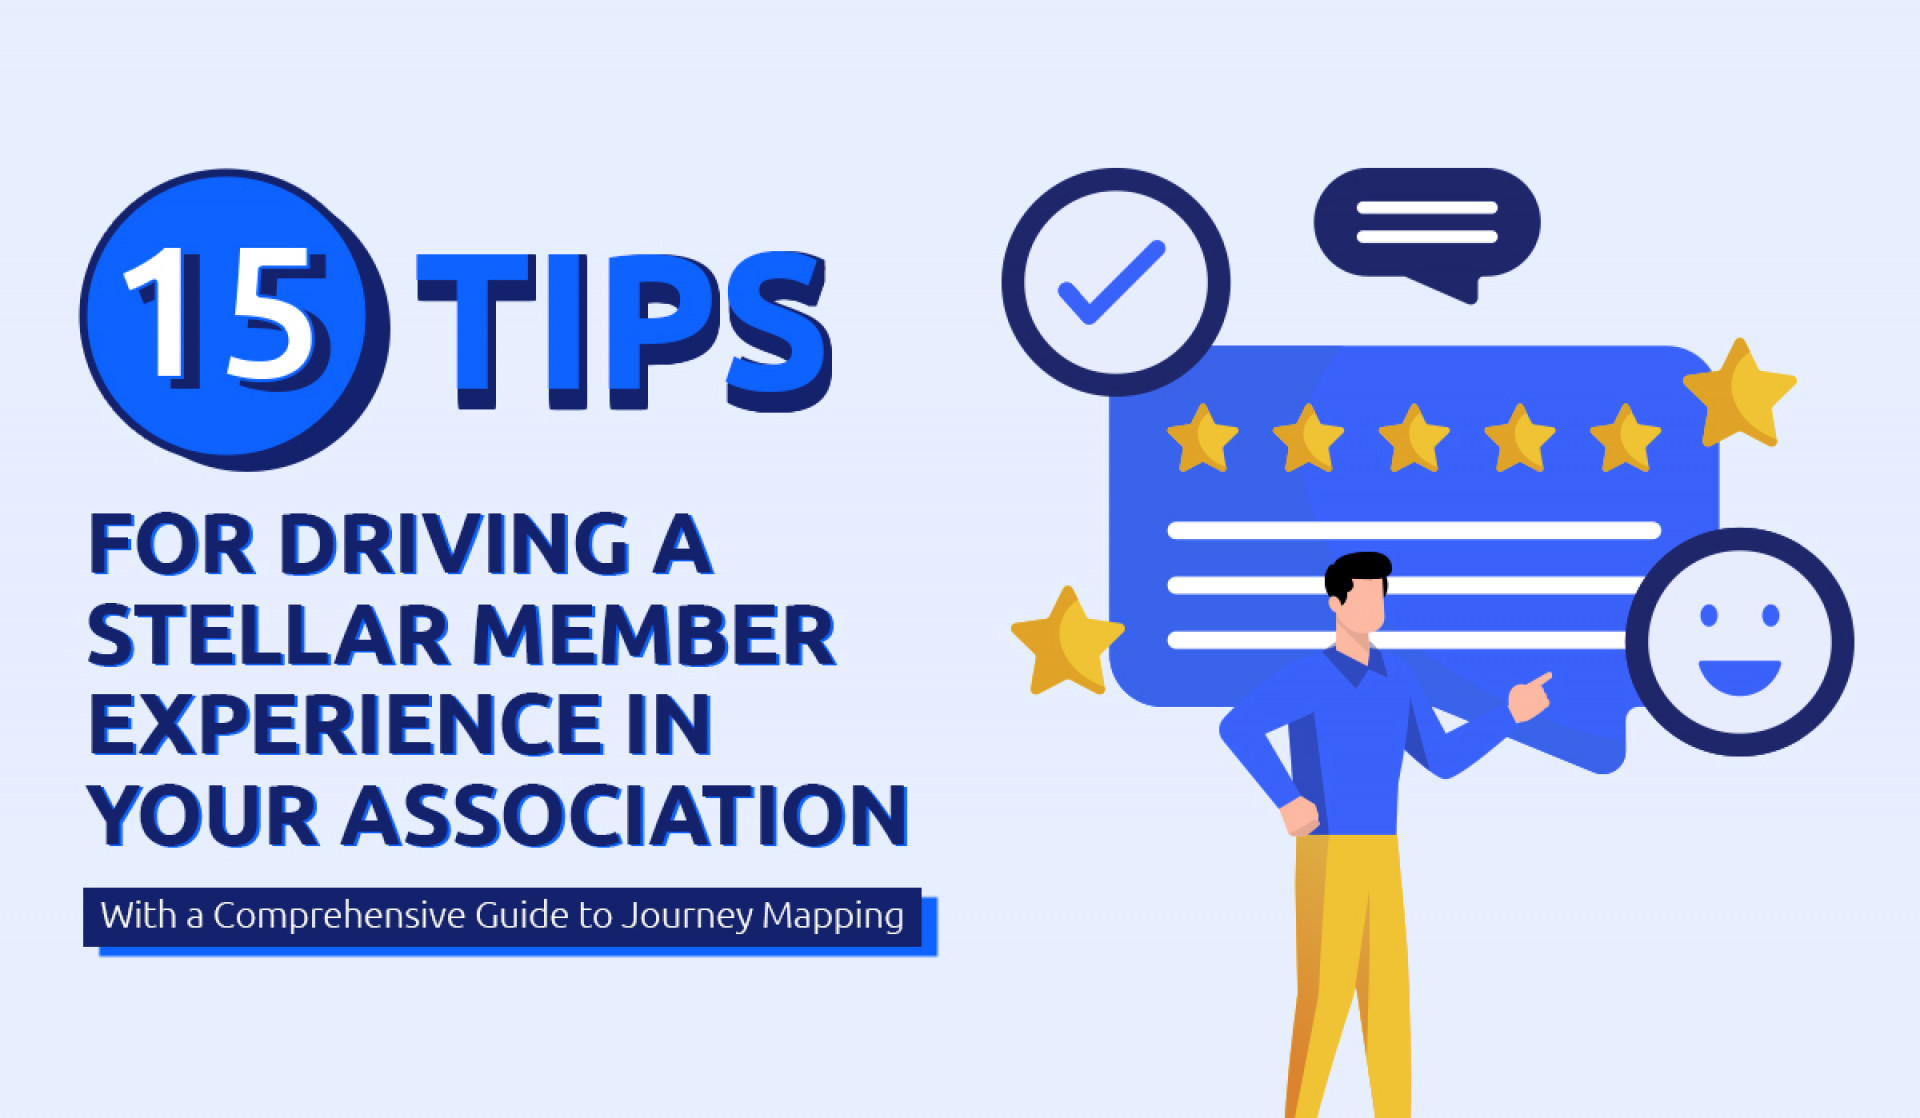 15 Tips for Driving a Stellar Member Experience in Your Association [With a Comprehensive Guide to Journey Mapping]